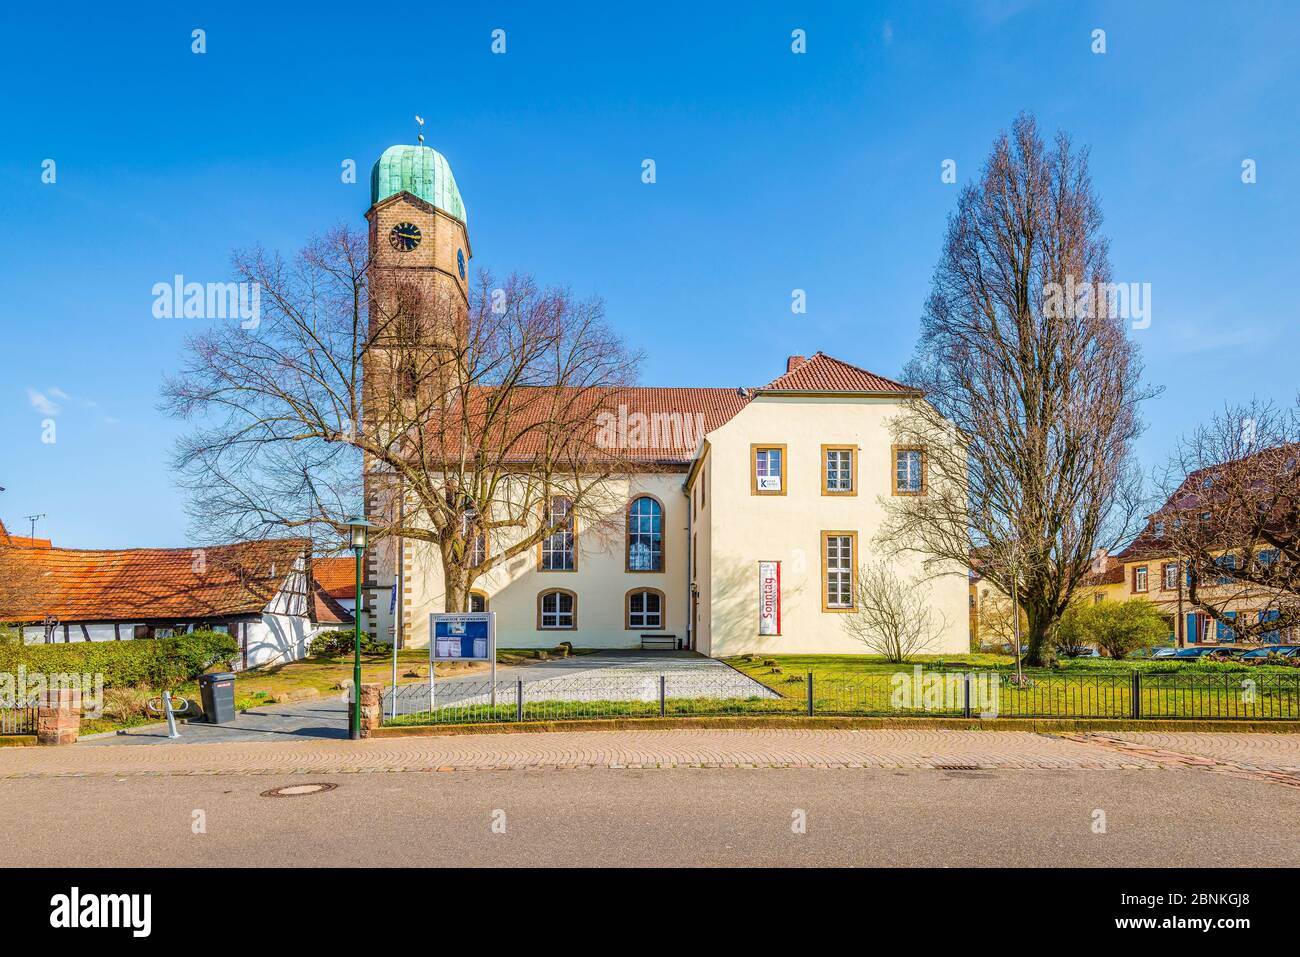 Burgkirche in Bad Dürkheim, formerly Protestant parish church, built in baroque style on the bottom of the Leiniger castle, which was destroyed in the Palatinate War of Succession, now serves as a community center and houses the Bad Dürkheim art association, Stock Photo